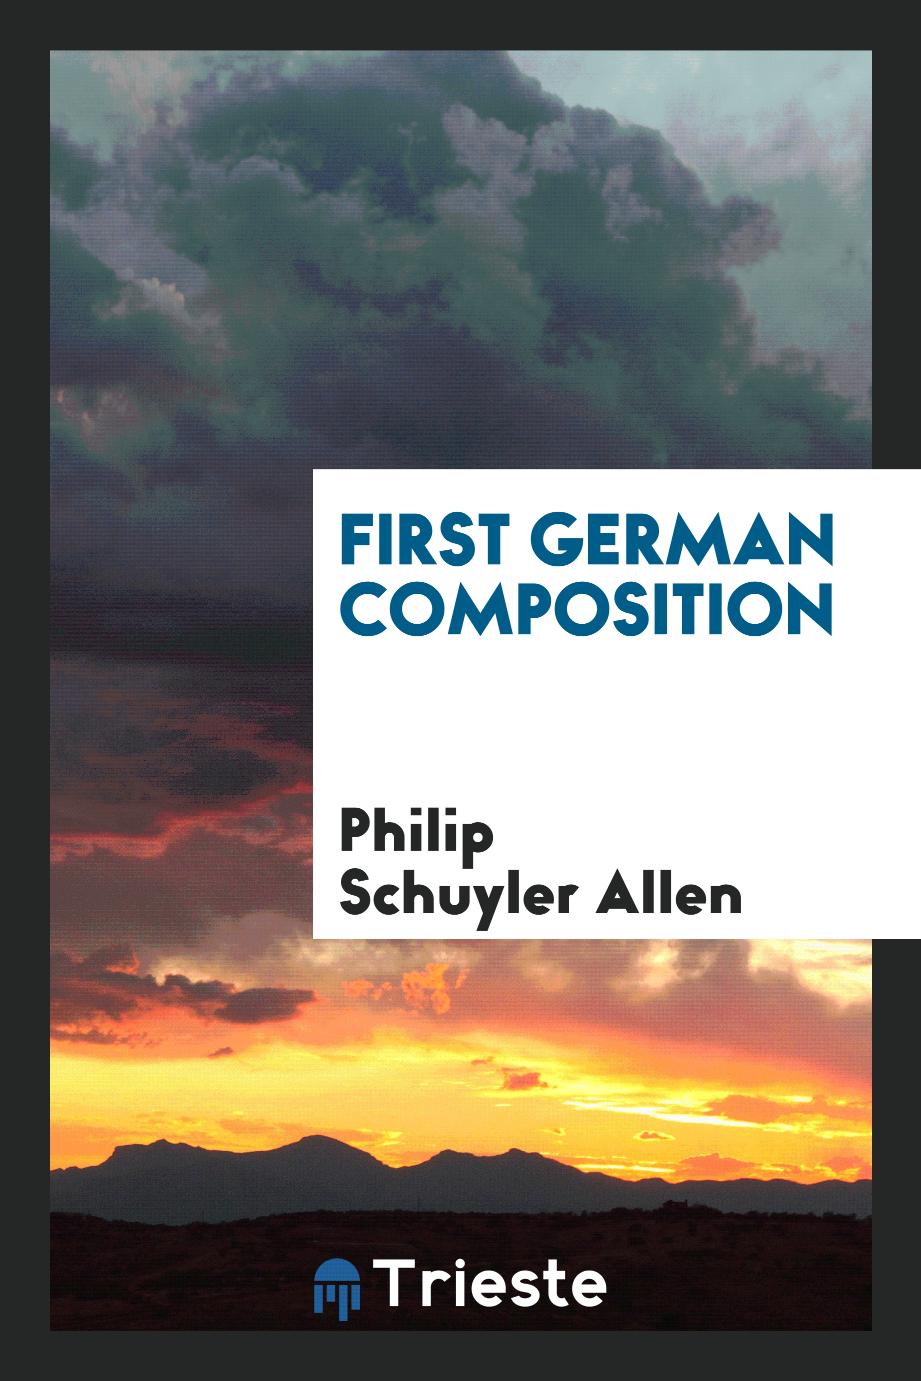 First German Composition